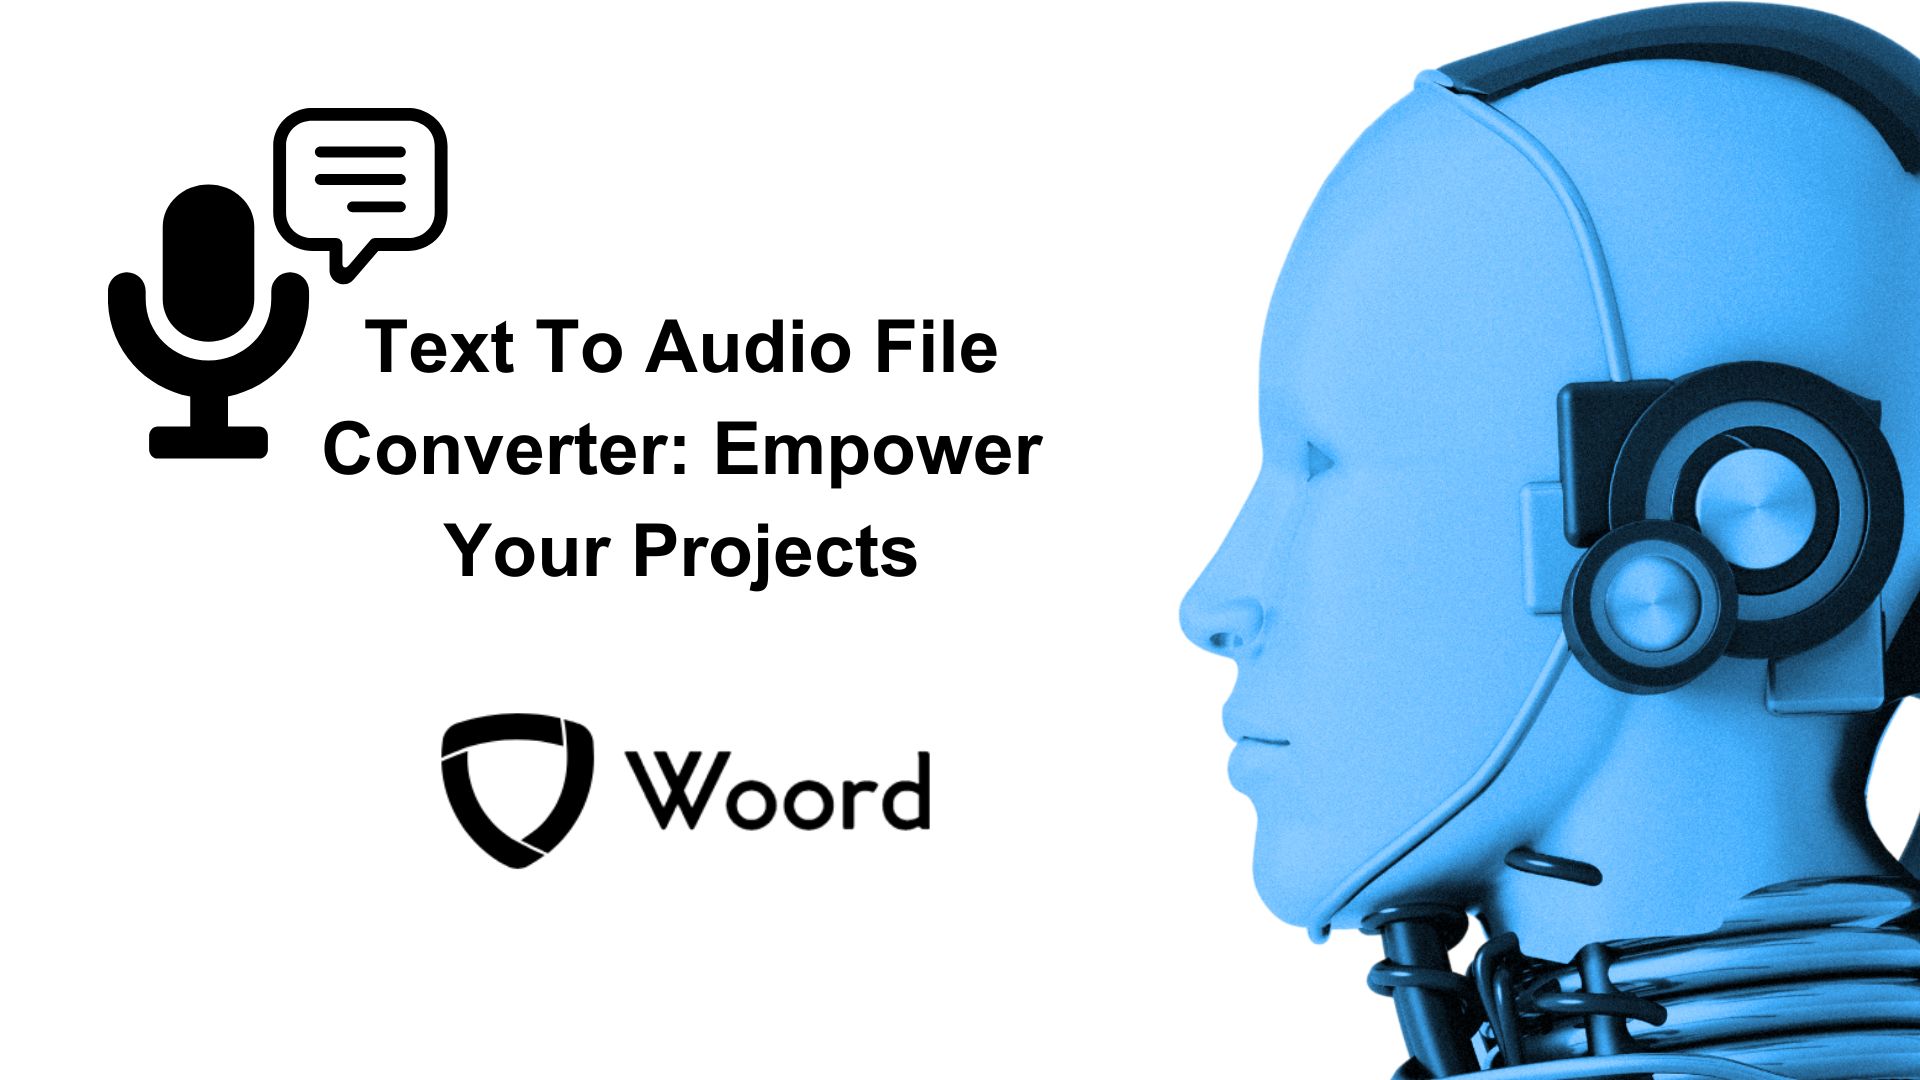 Text To Audio File Converter: Empower Your Projects